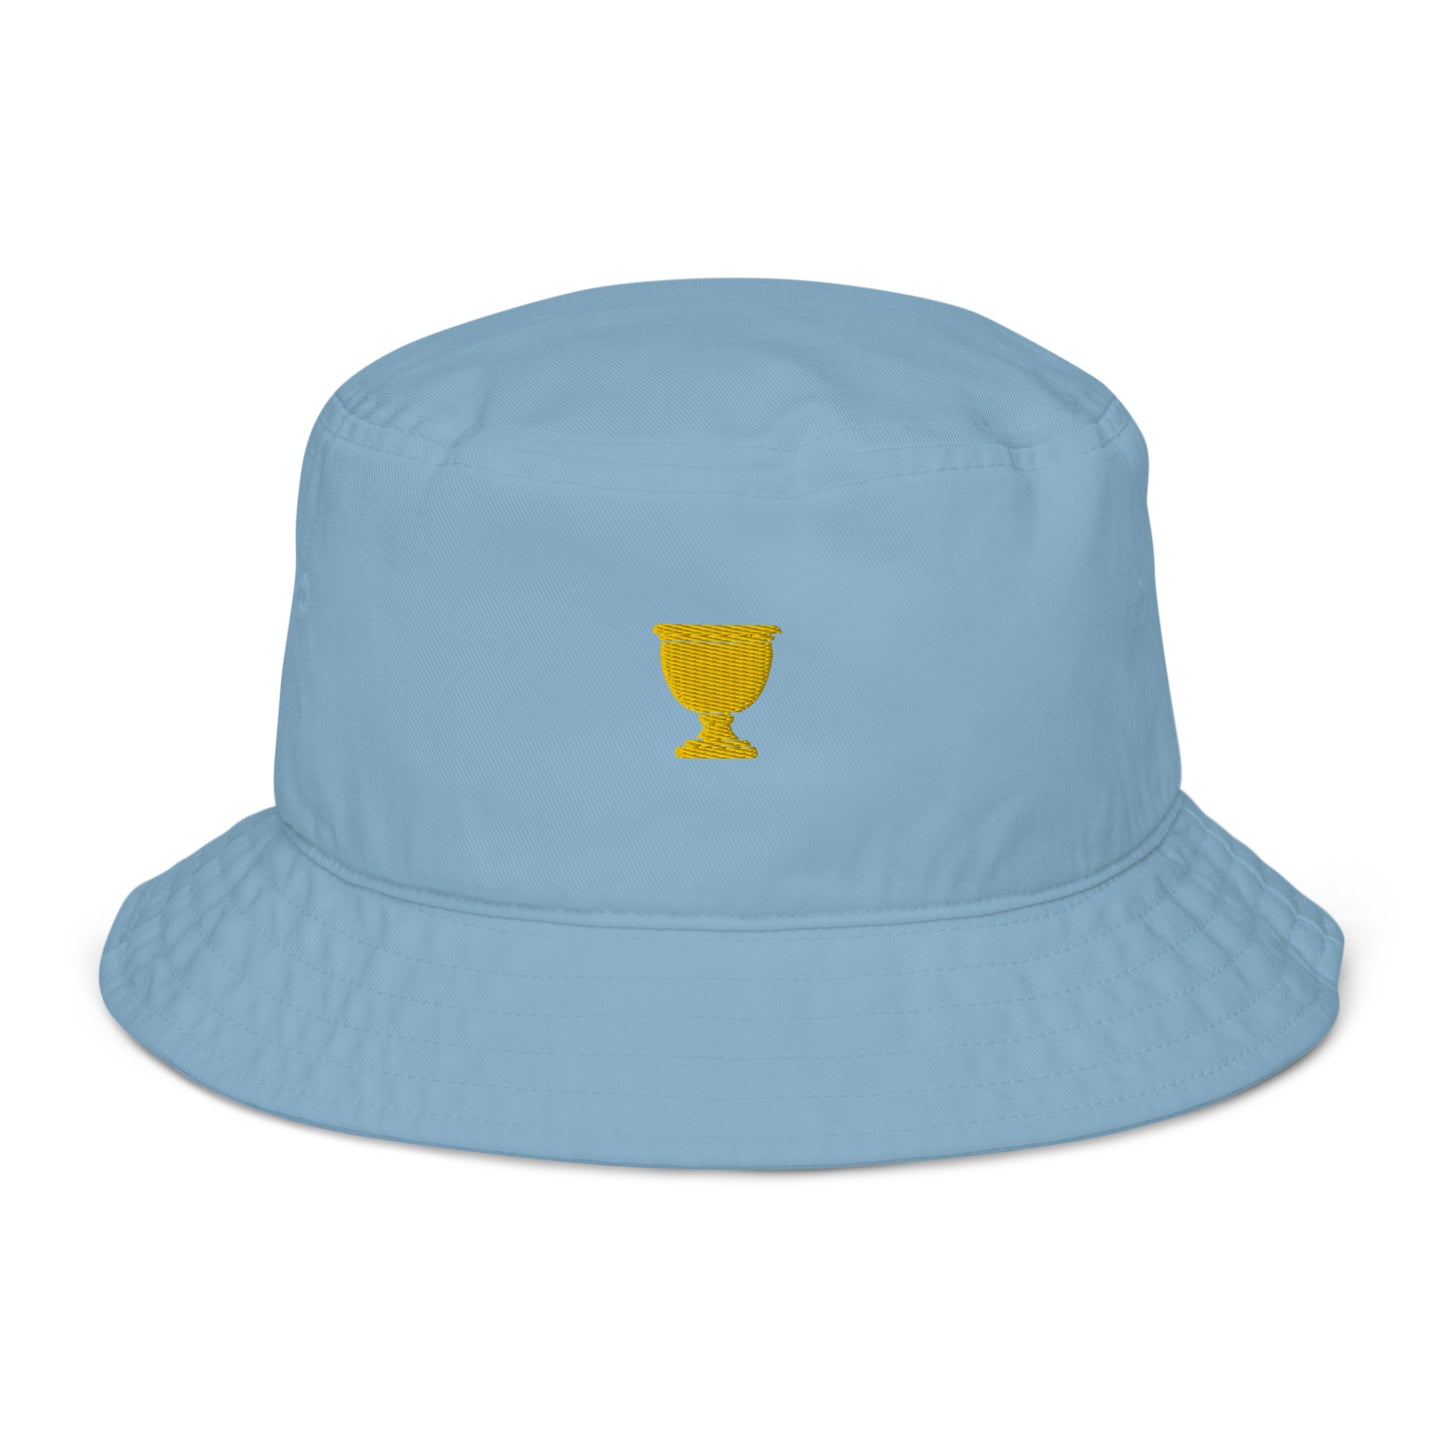 President's Cup Bucket Hat / president's Cup 2022 Organic bucket hat